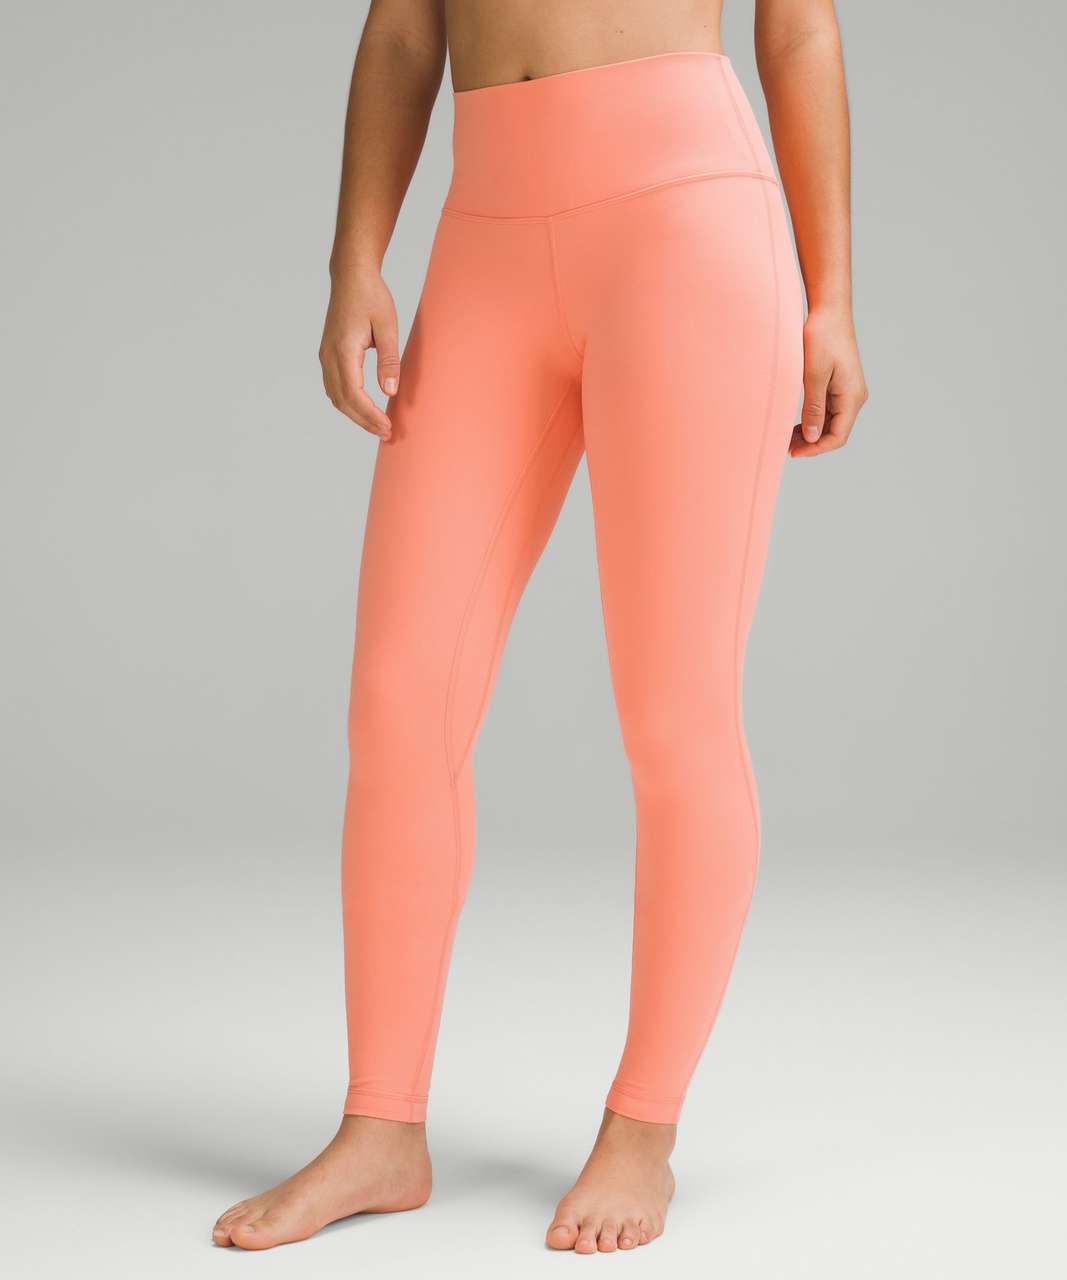 Lululemon Align High-Rise Pant 28" - Sunny Coral